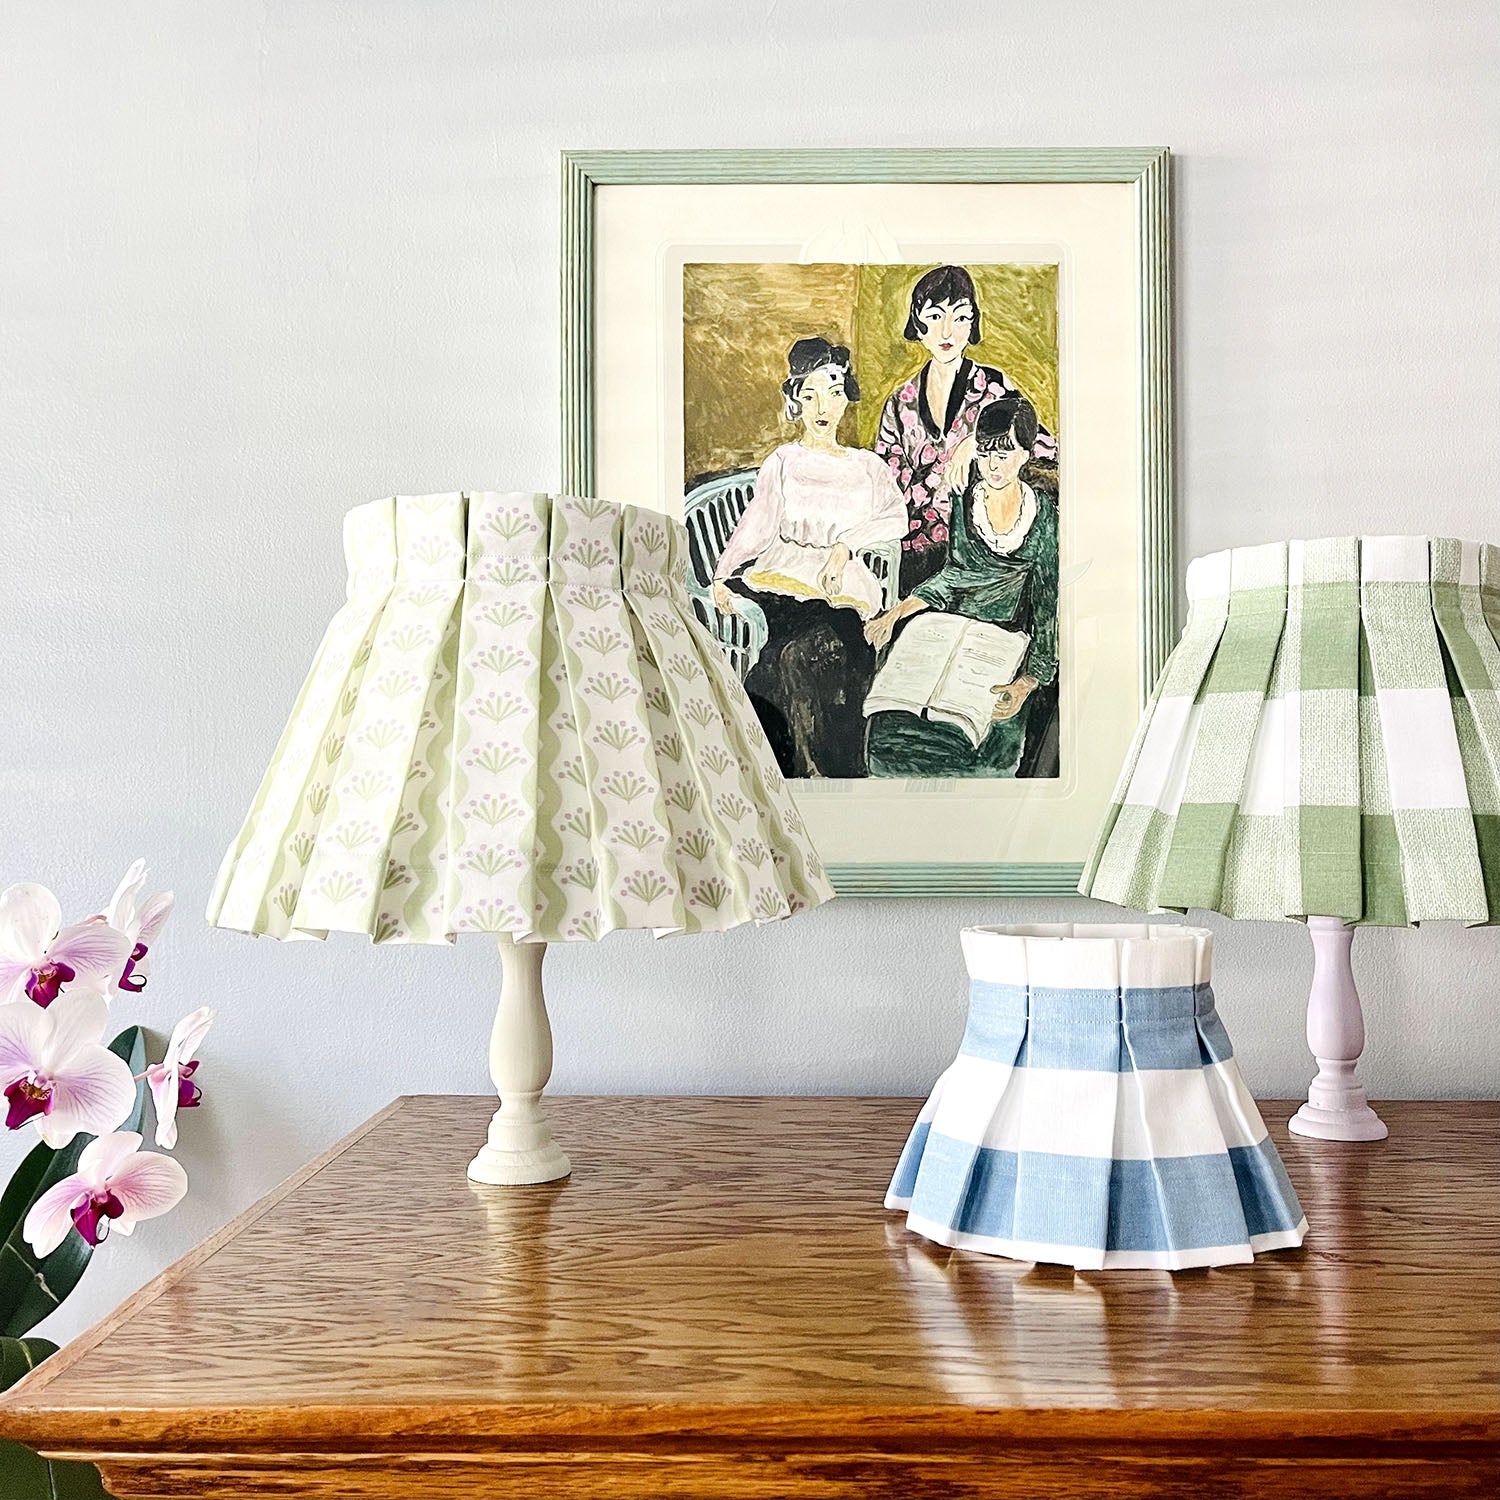 Cute lampshades in green floral scallops, green plaid, and blue and white stripes with a painting from Matisse